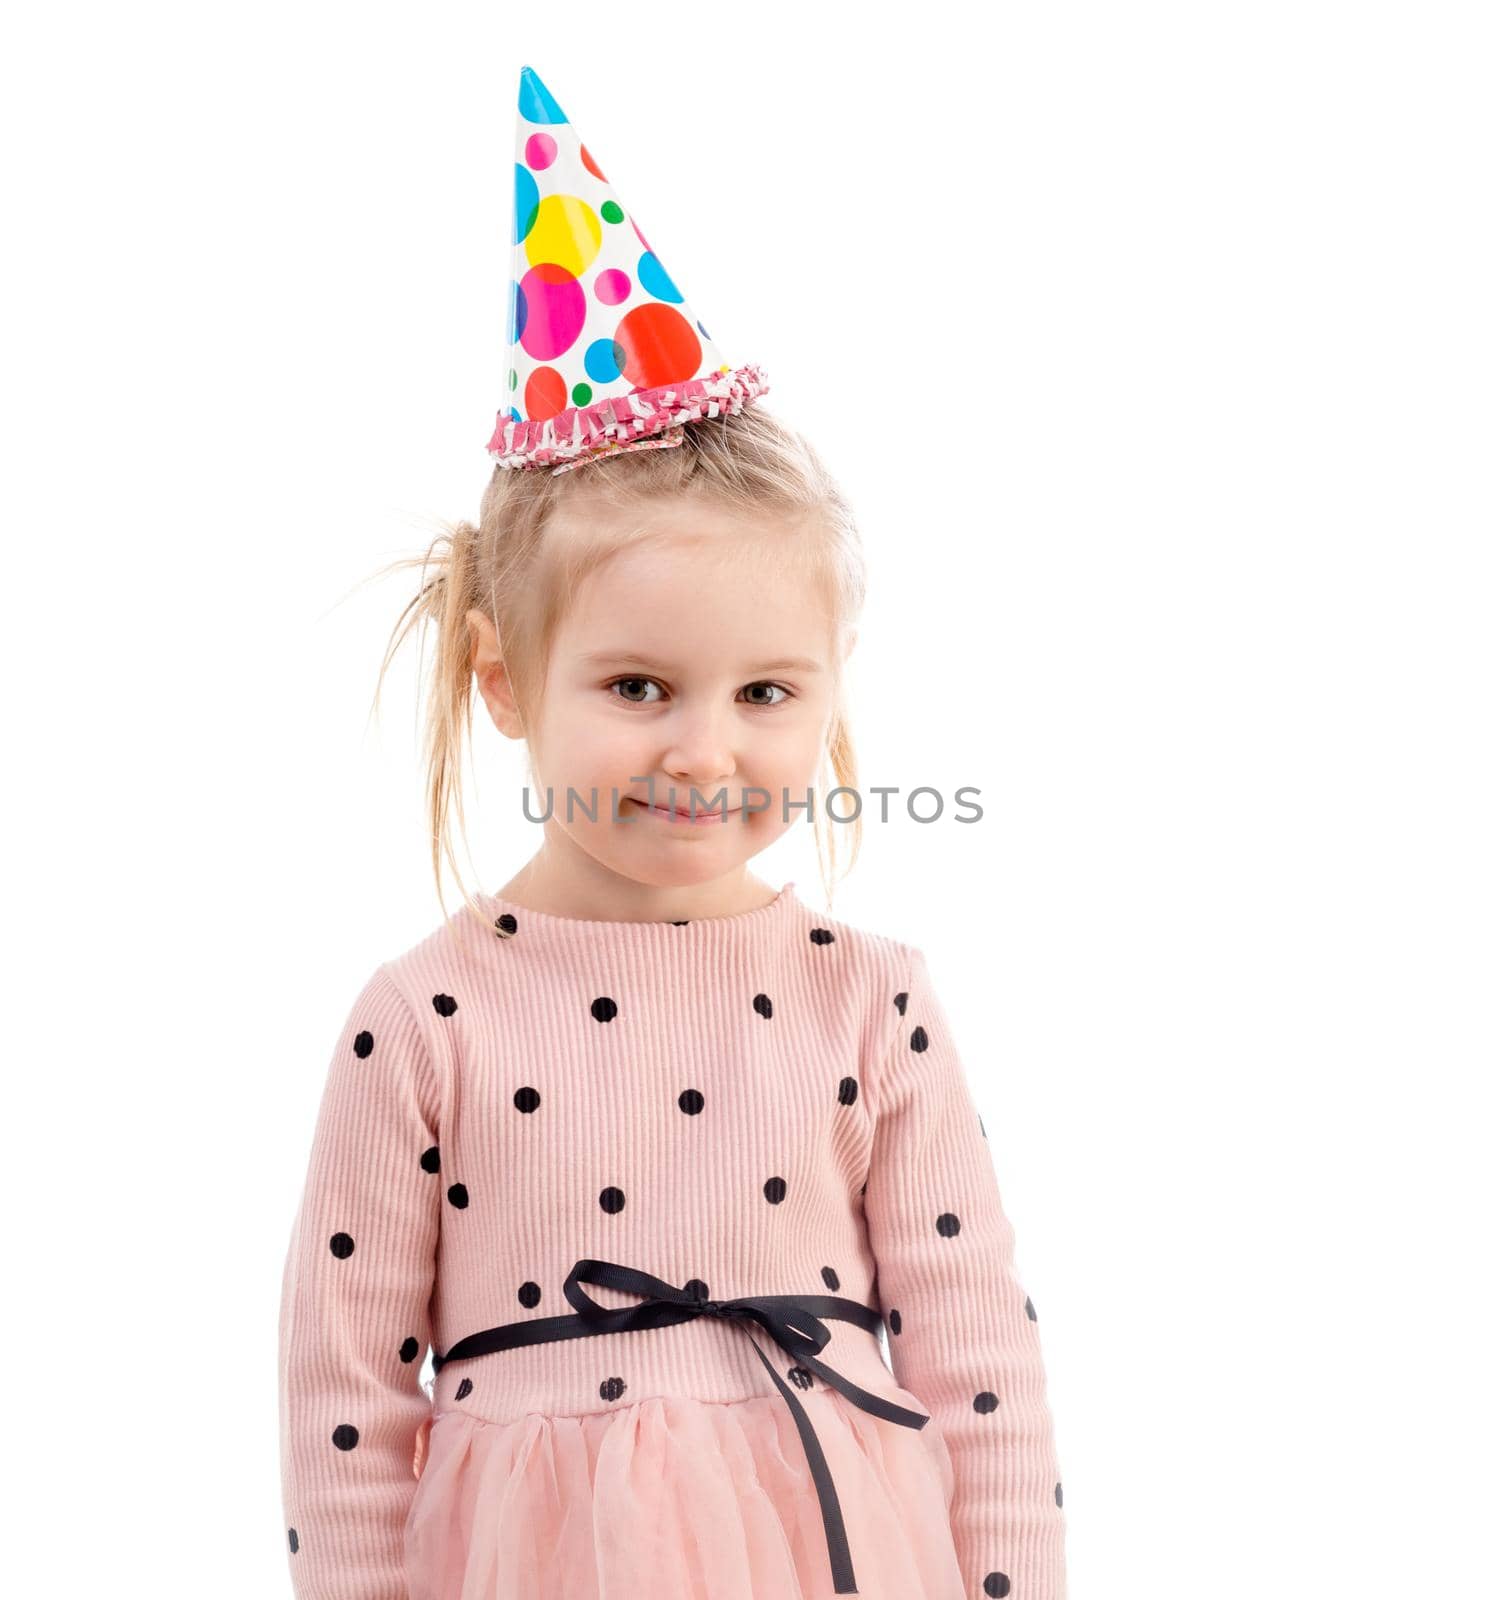 Girl in colorful cap hasher birthday, isolated by tan4ikk1